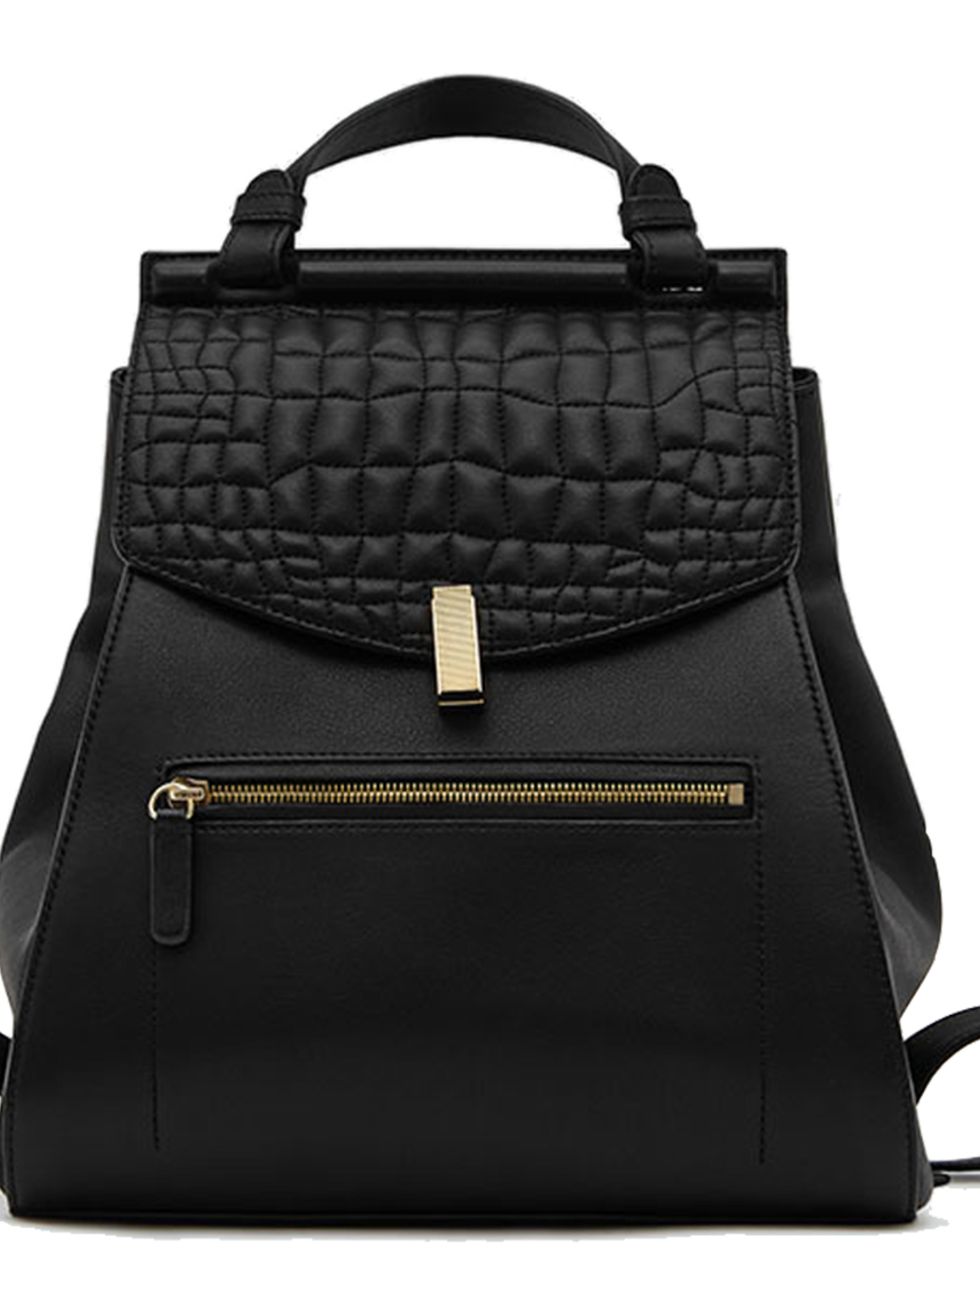 <p>Quilted rucksack, £265 by <a href="http://www.reiss.com/womens/bags/alto/black/#">Reiss</a>.</p>